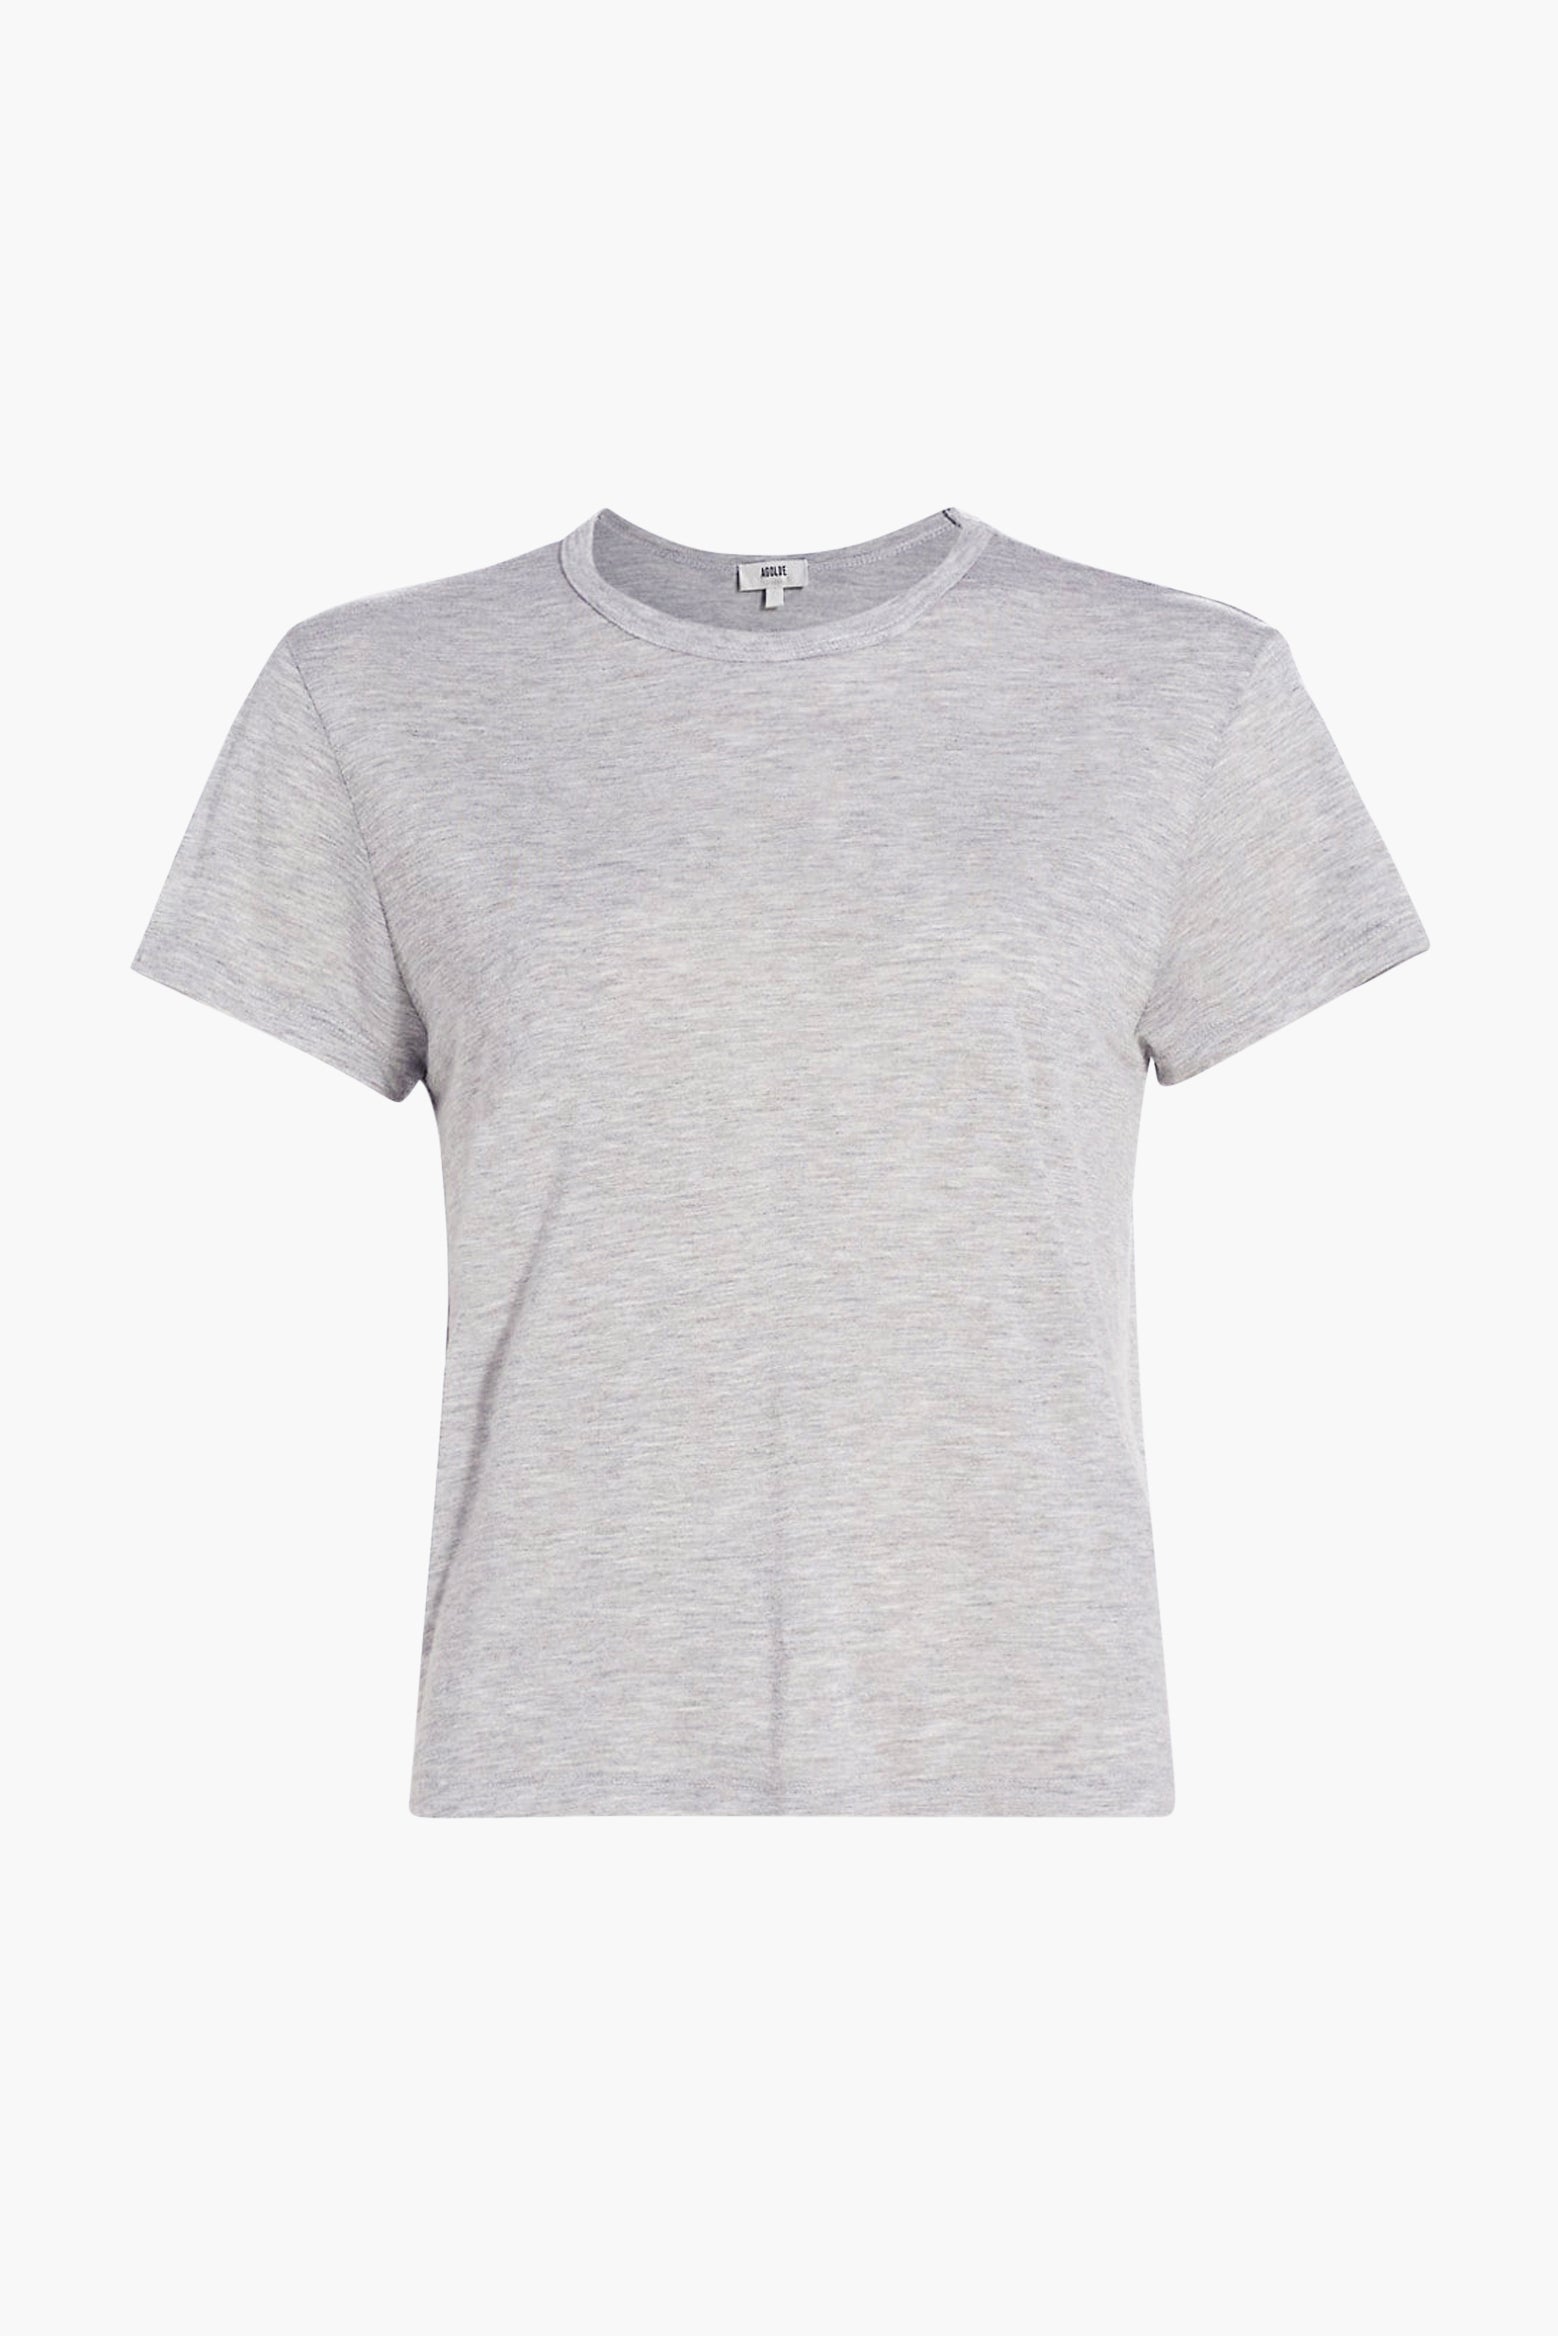 Agolde Drew Cap Sleeve Tee in Grey Heather available at TNT The New Trend